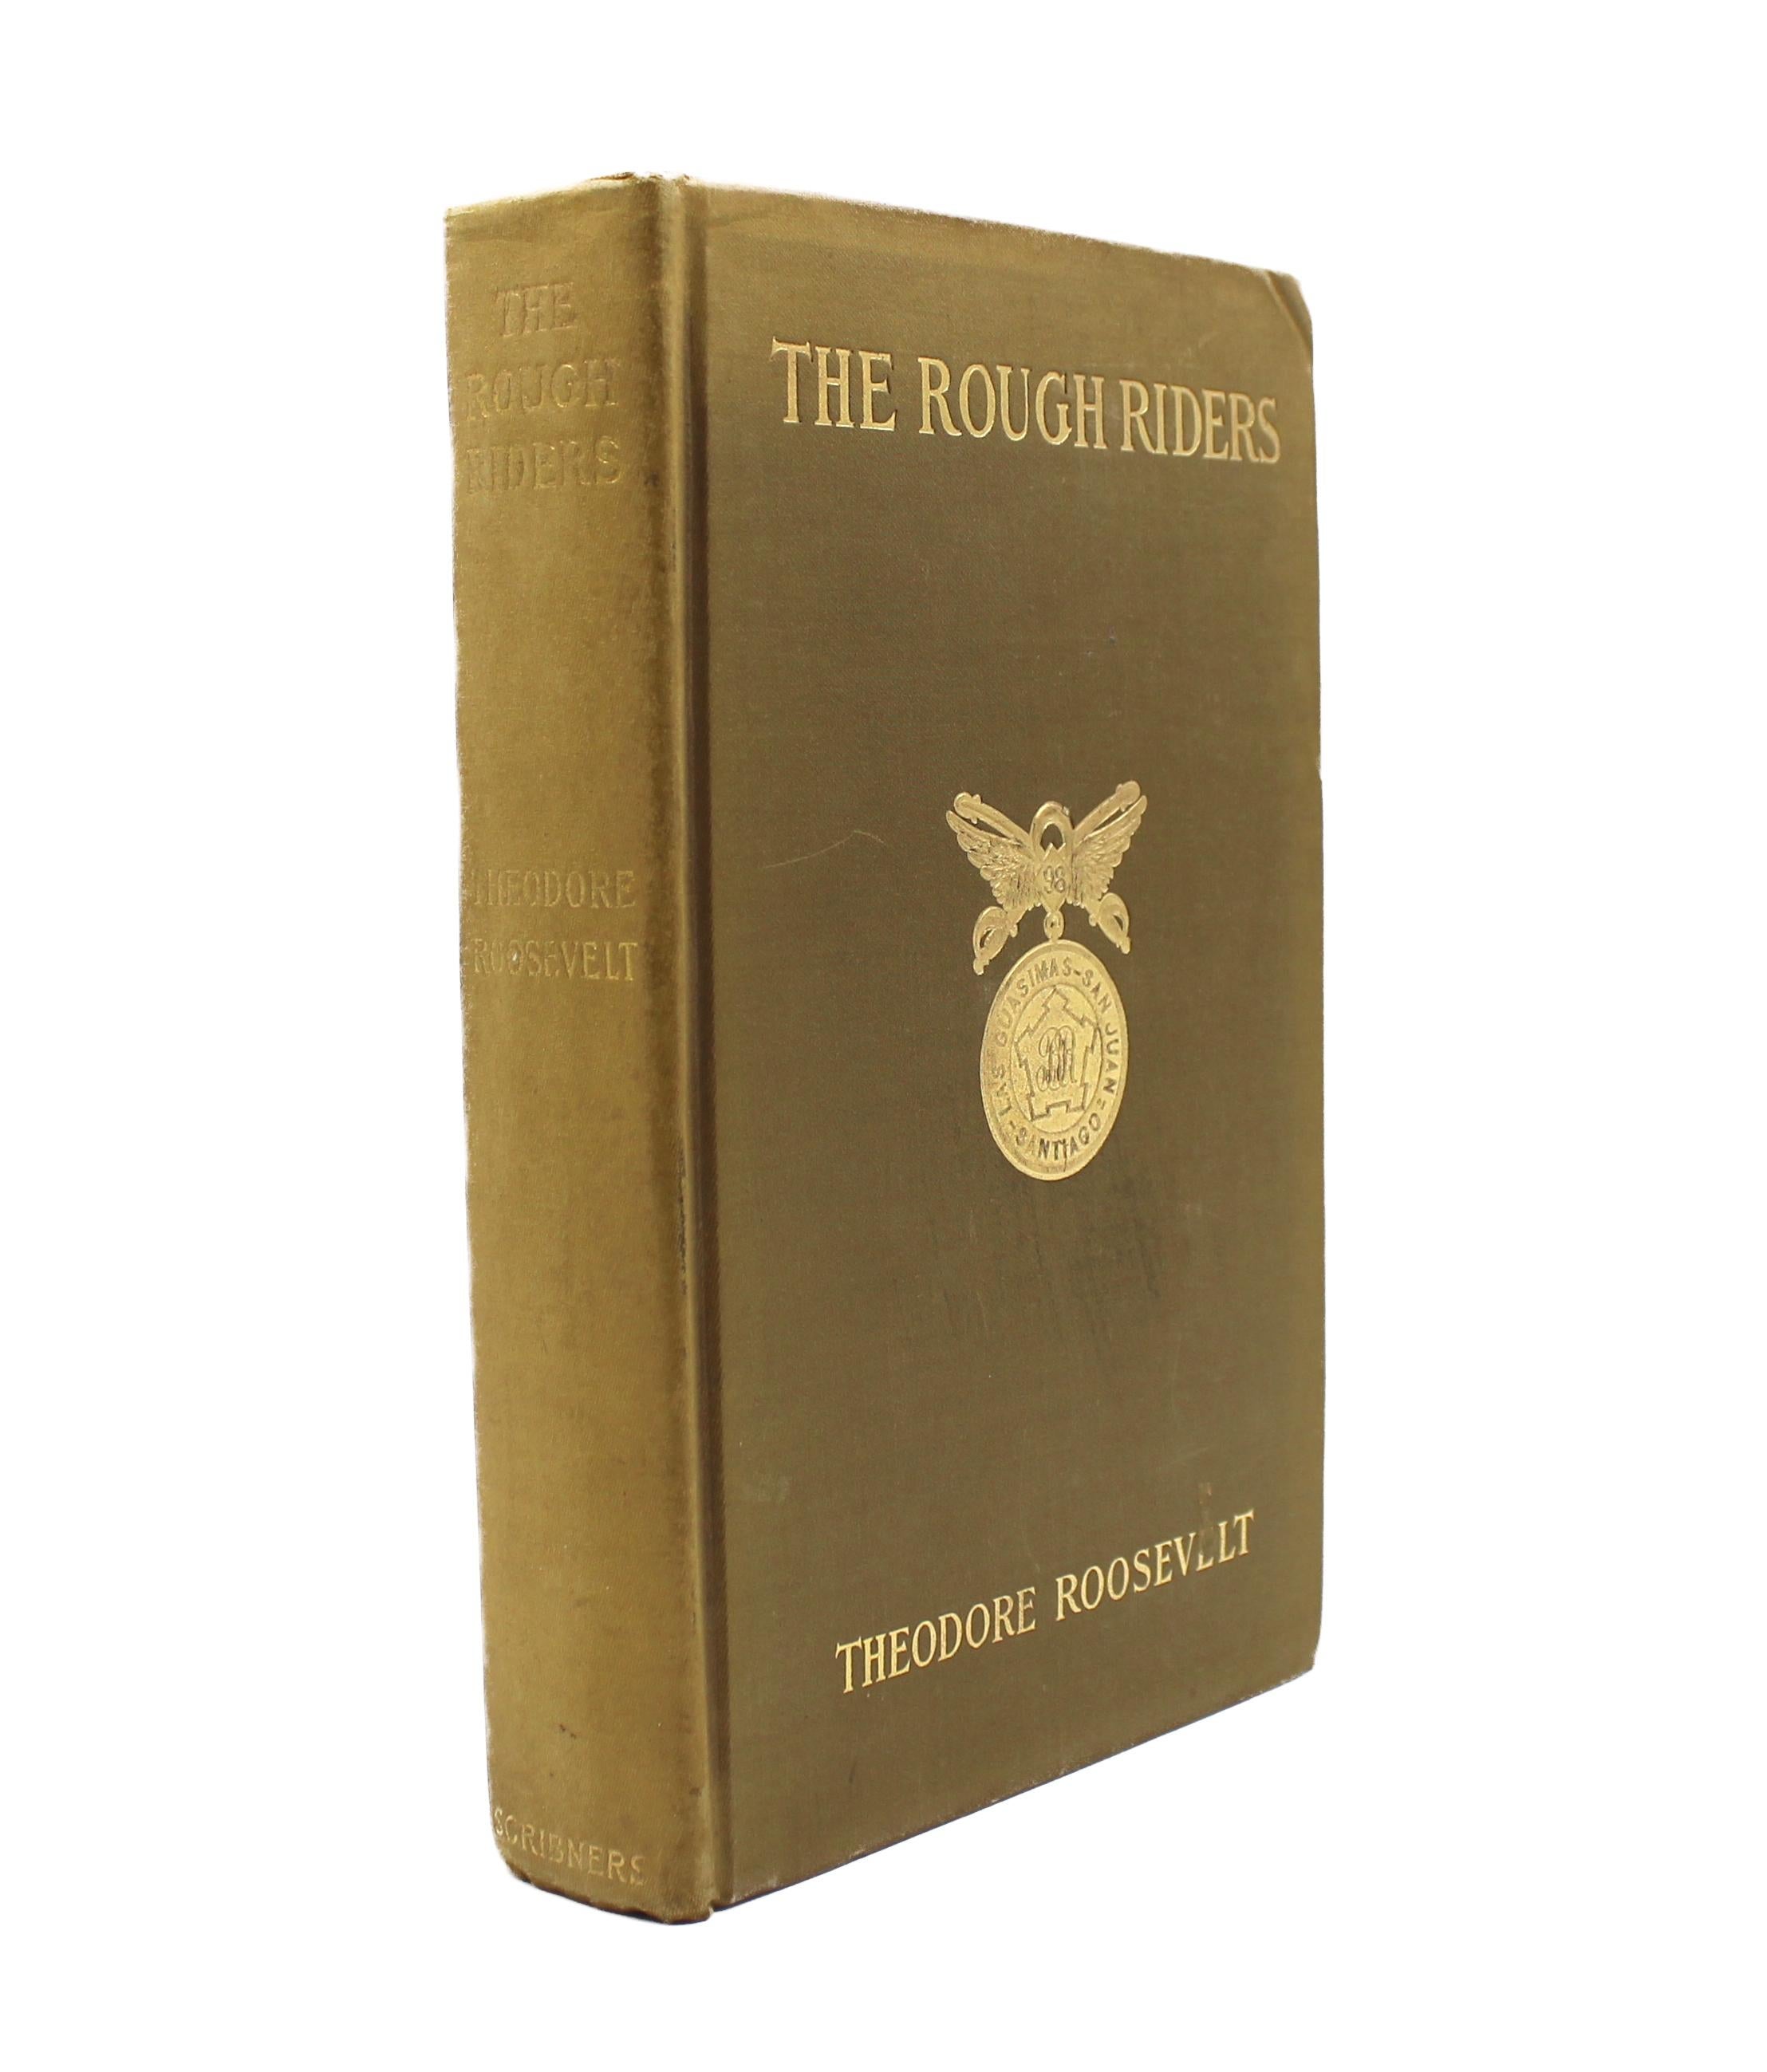 American The Rough Riders by Theodore Roosevelt, First Edition, 1899